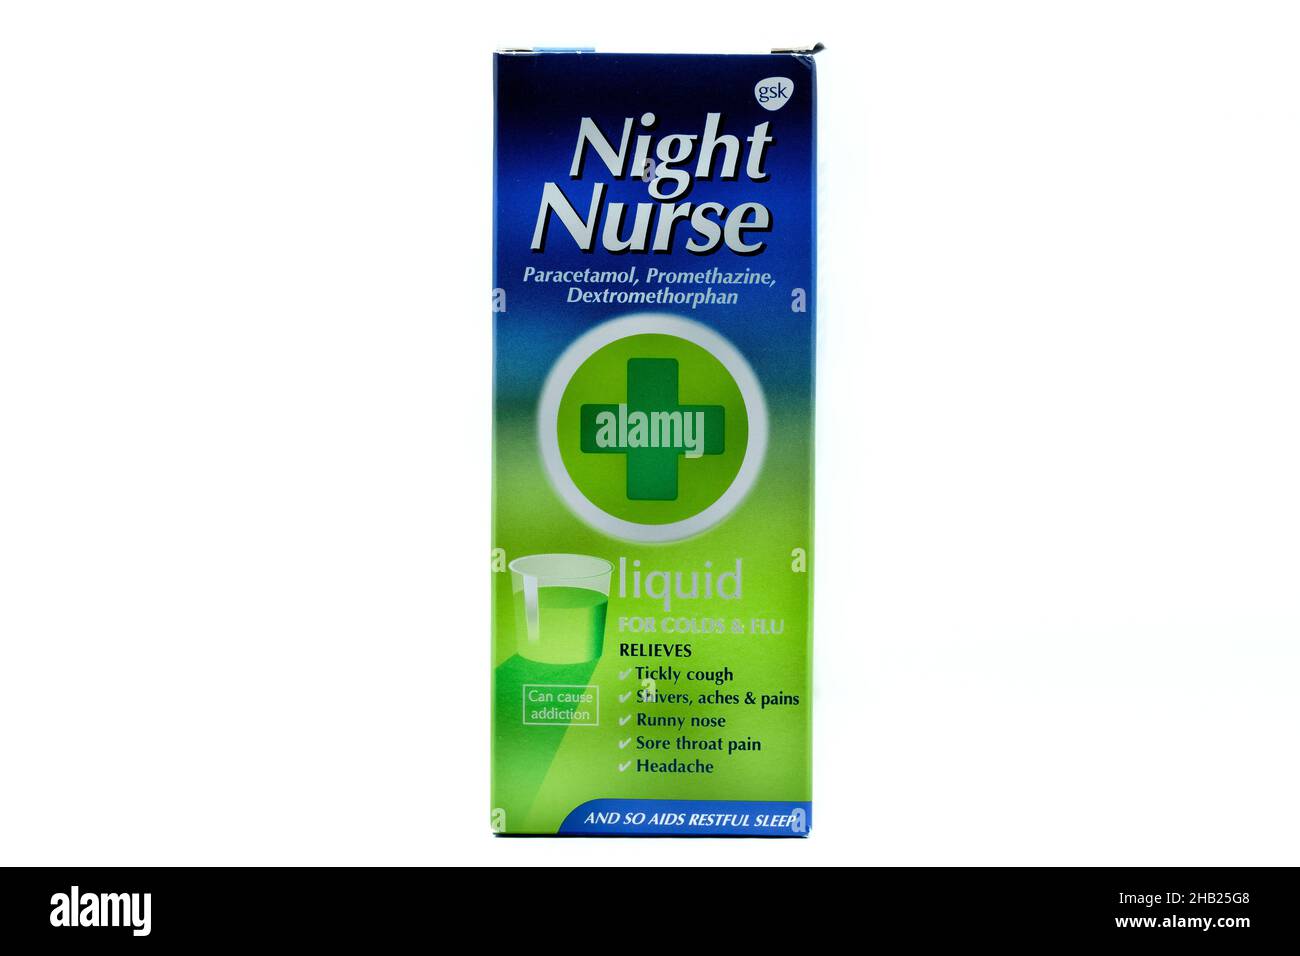 A 160ml box of Night Nurse liquid medication photographed against a white background. An over the counter cold remedy drug in the UK Stock Photo